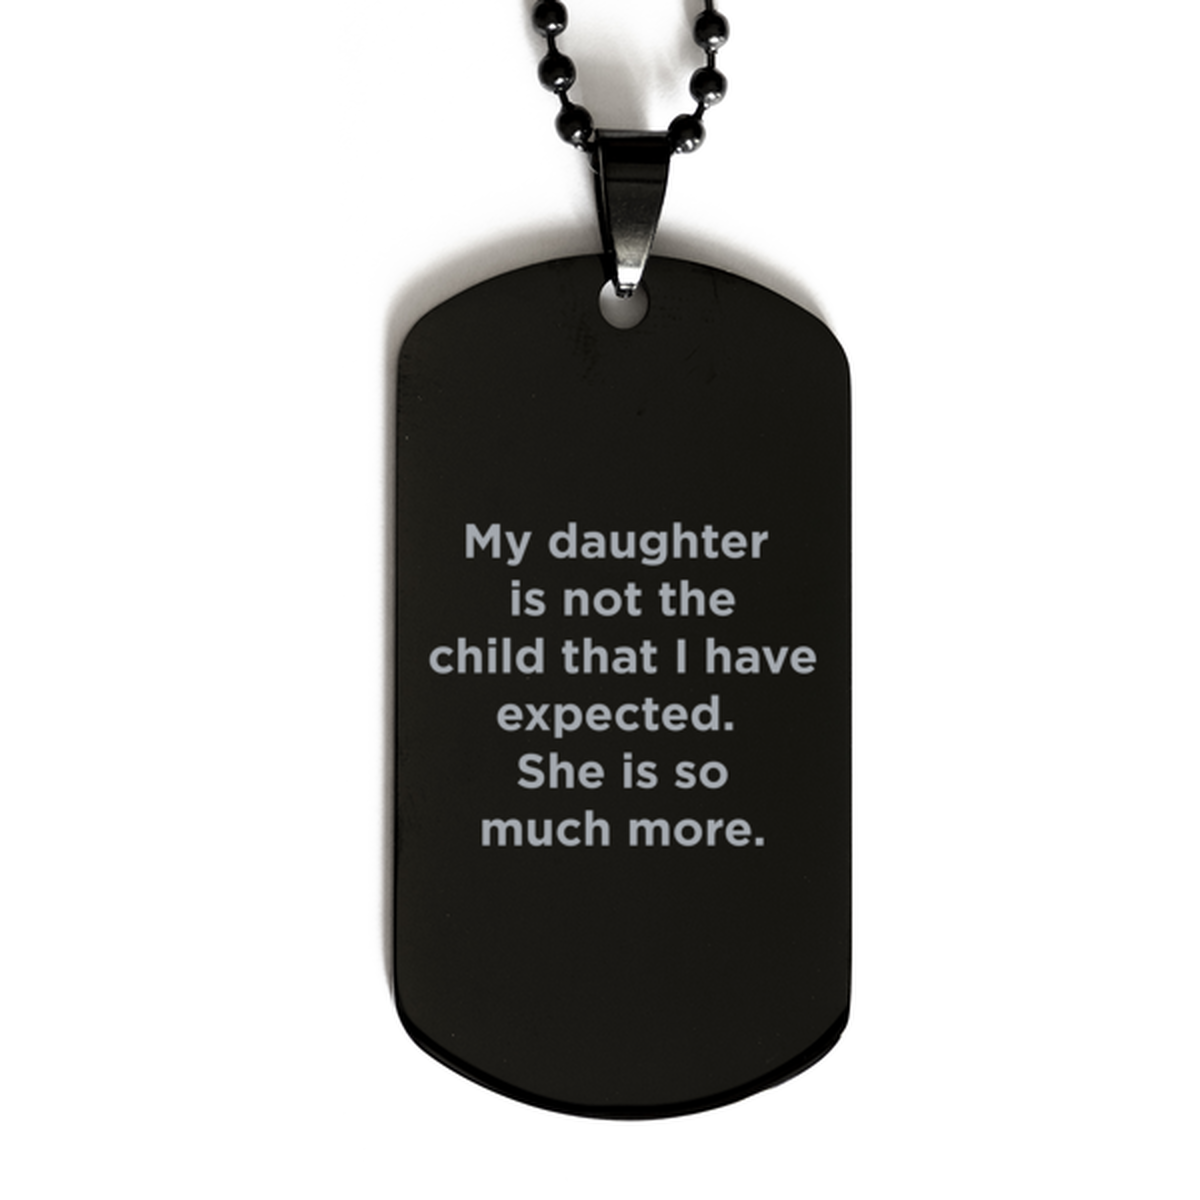 To My Daughter Black Dog Tag, She Is So Much More, Birthday Gifts For Daughter From Mom, Christmas Gifts For Women